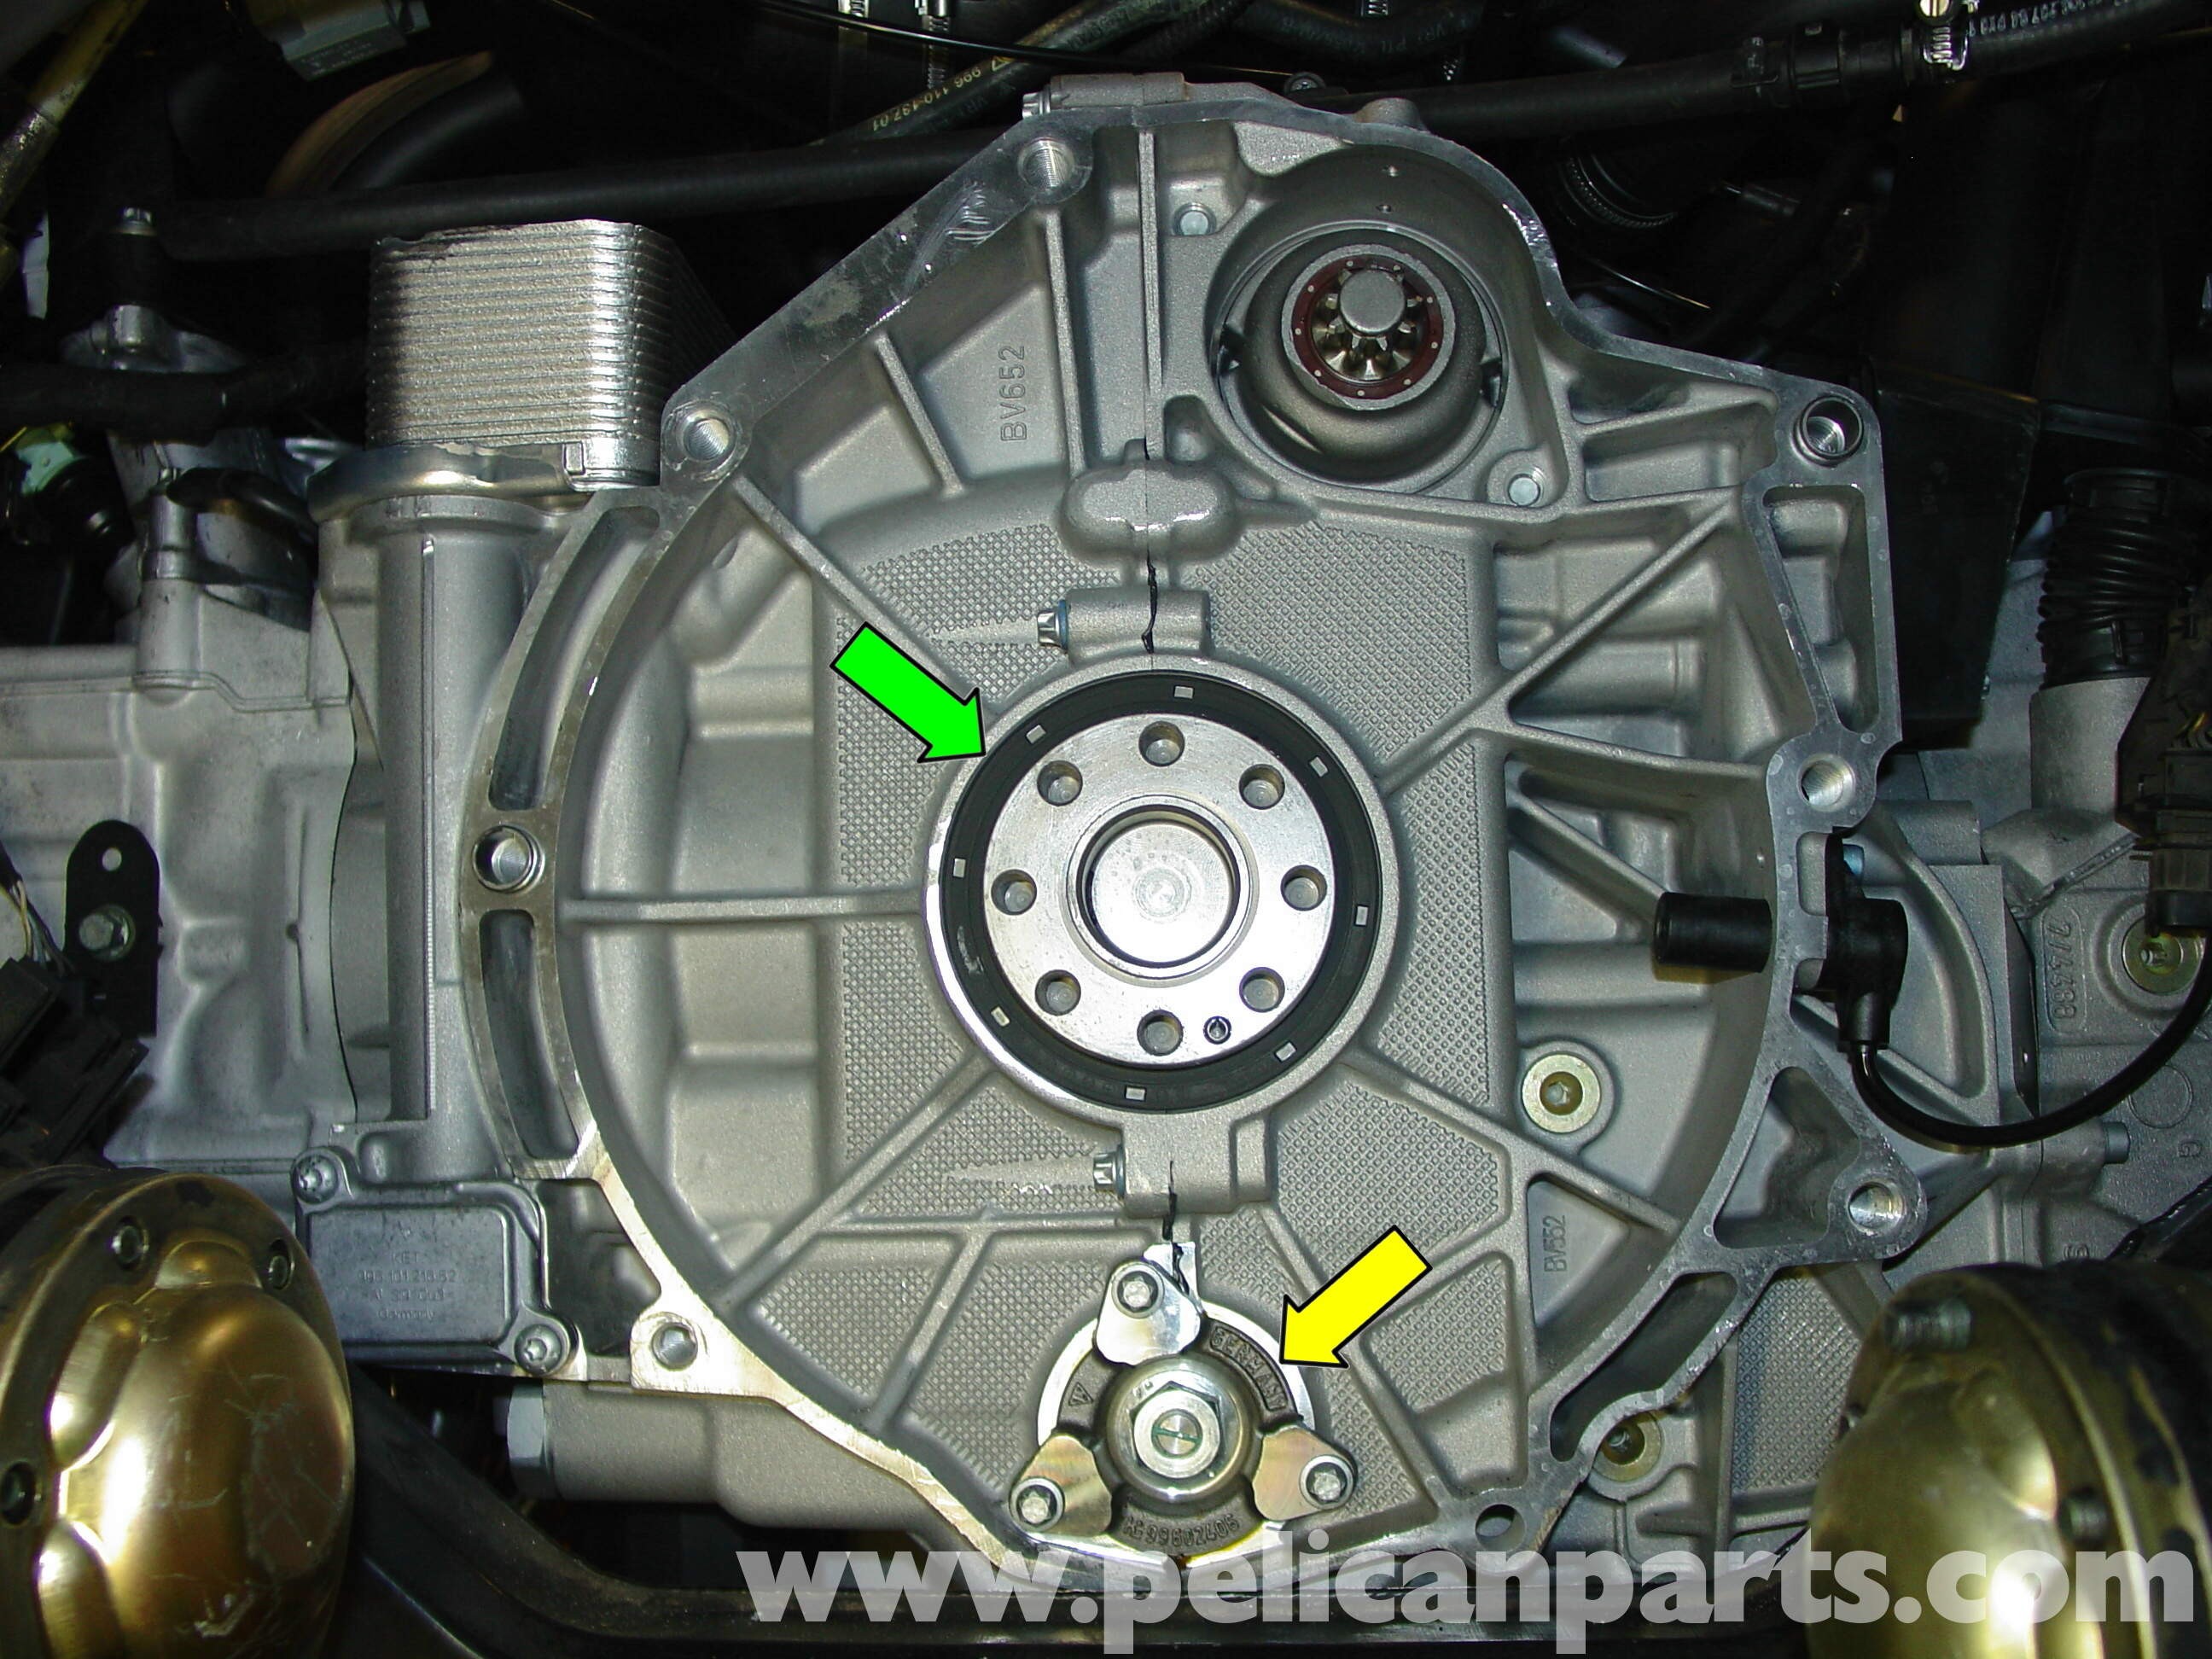 Porsche Boxster Engine Diagram Pelican Technical Article Mon Boxster Engine Problems and Of Porsche Boxster Engine Diagram